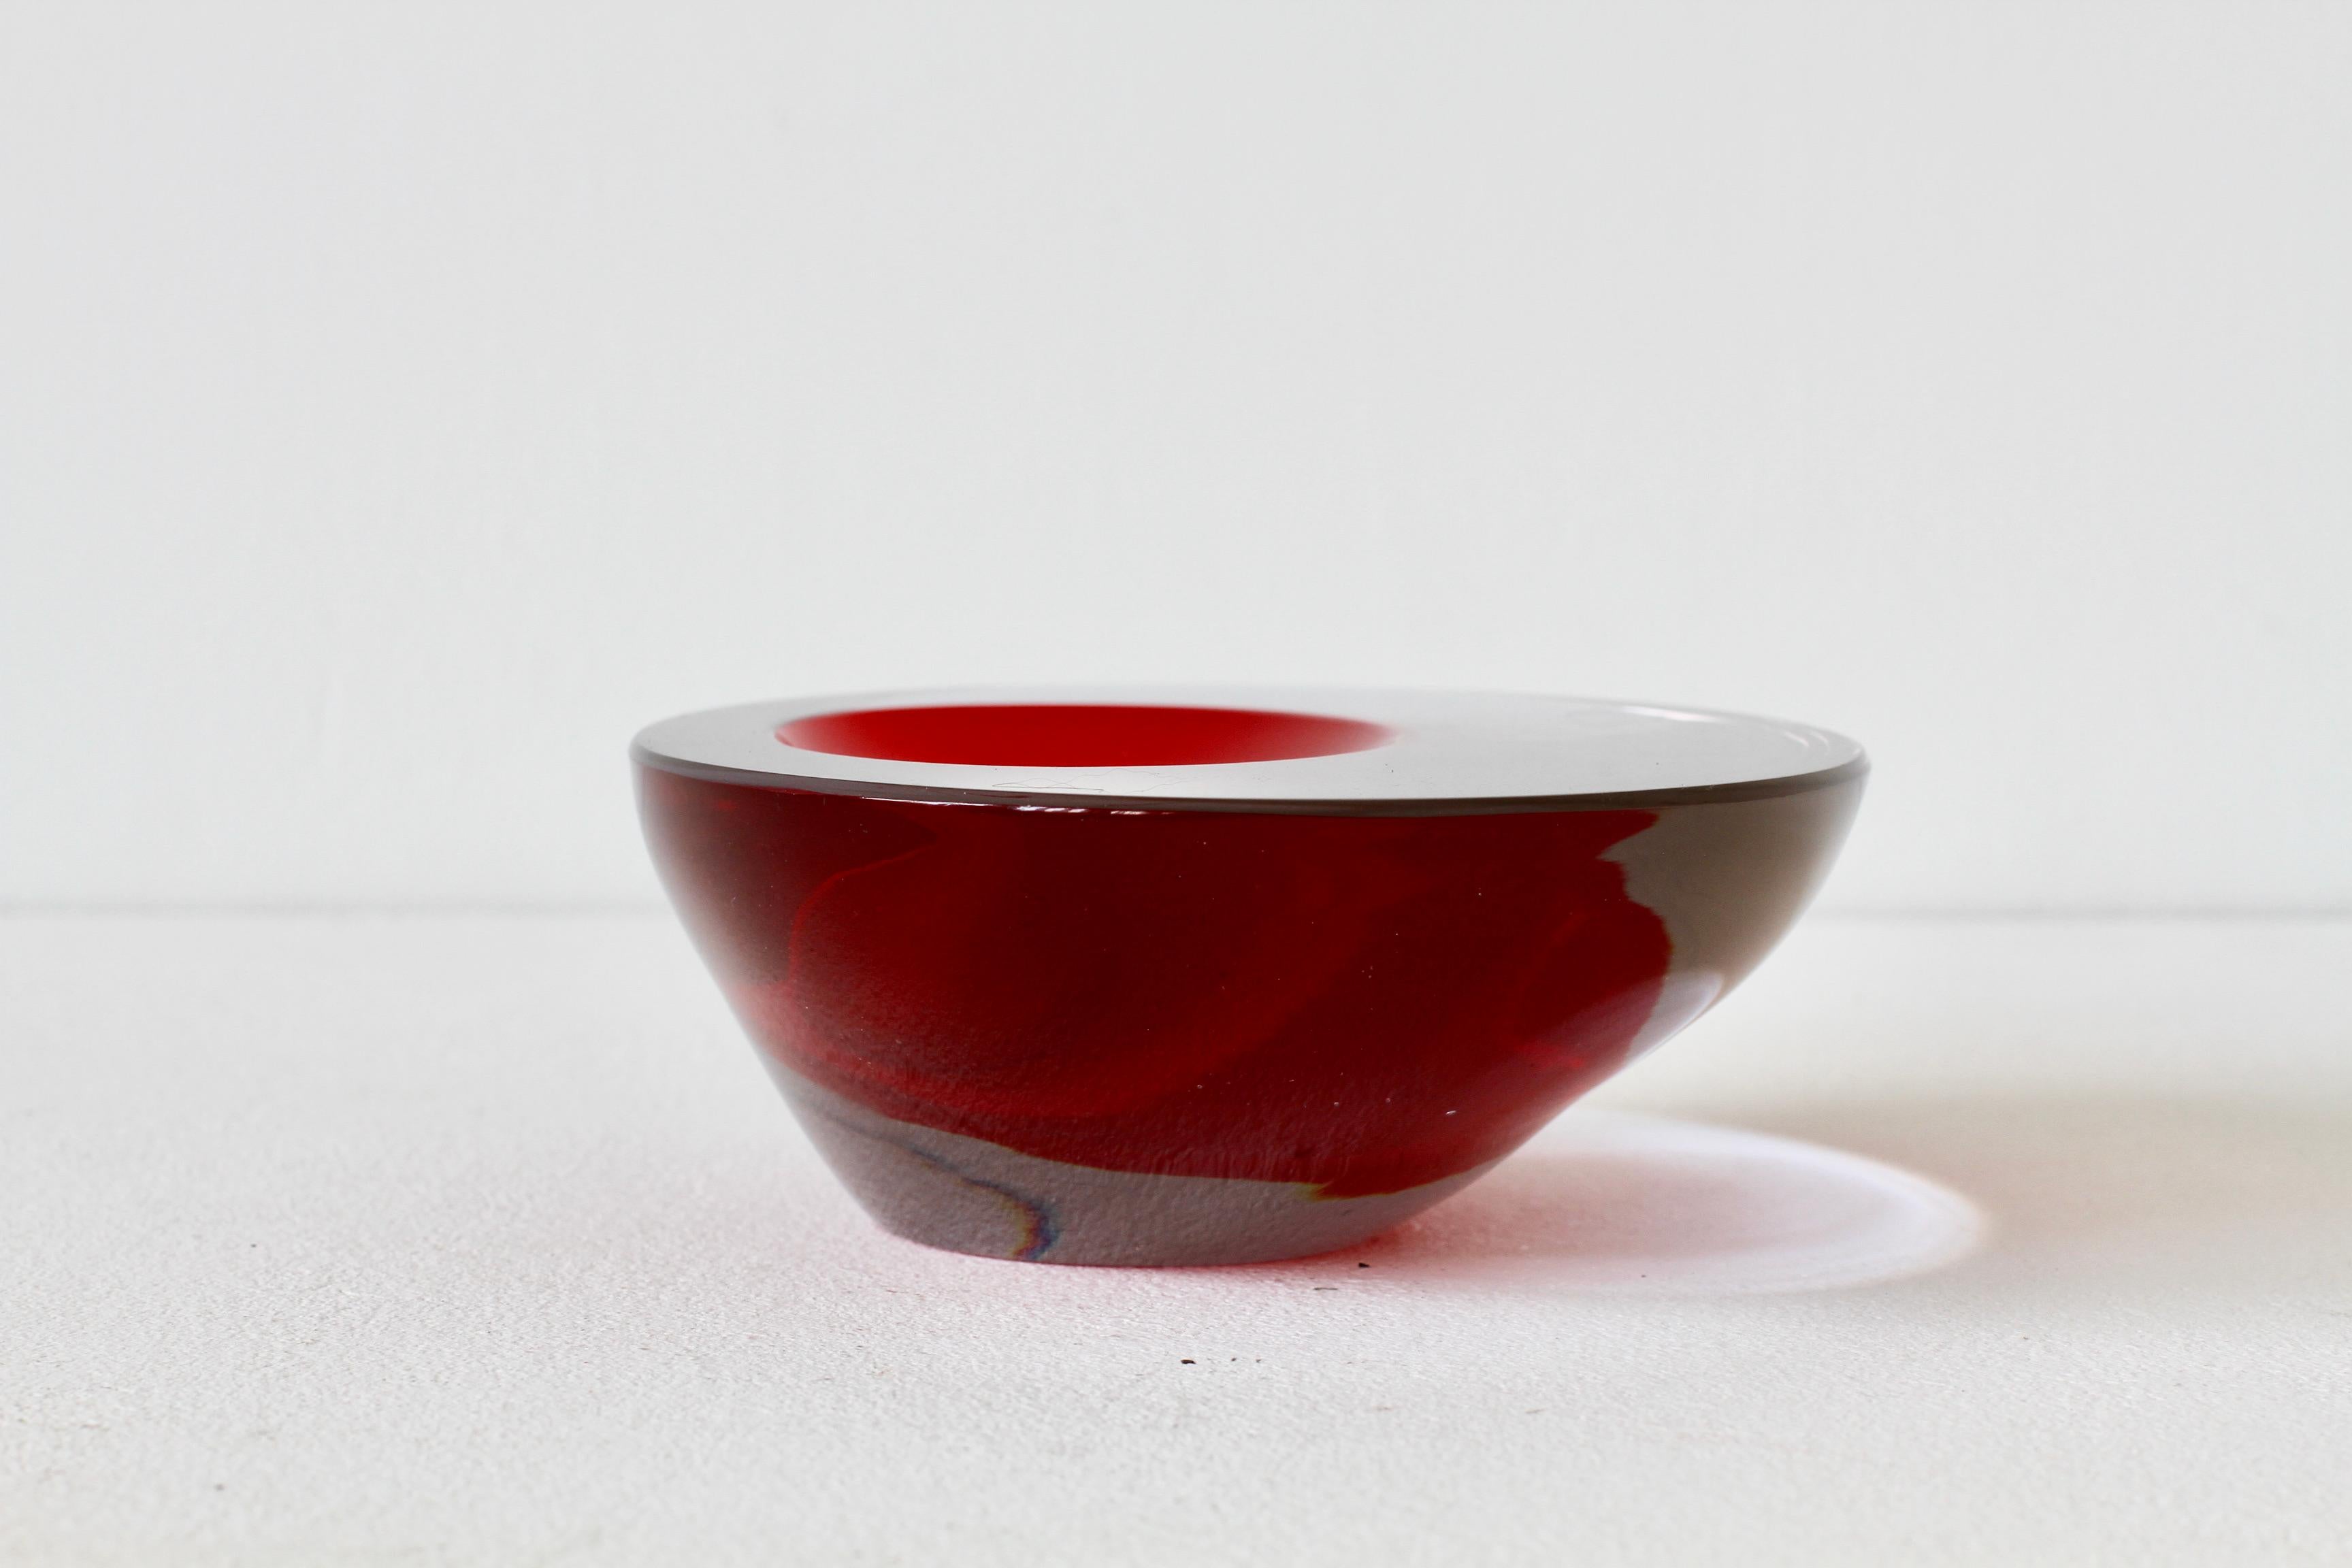 Blown Glass Large Cenedese Italian Asymmetric Red Sommerso Murano Glass Bowl Dish or Ashtray For Sale